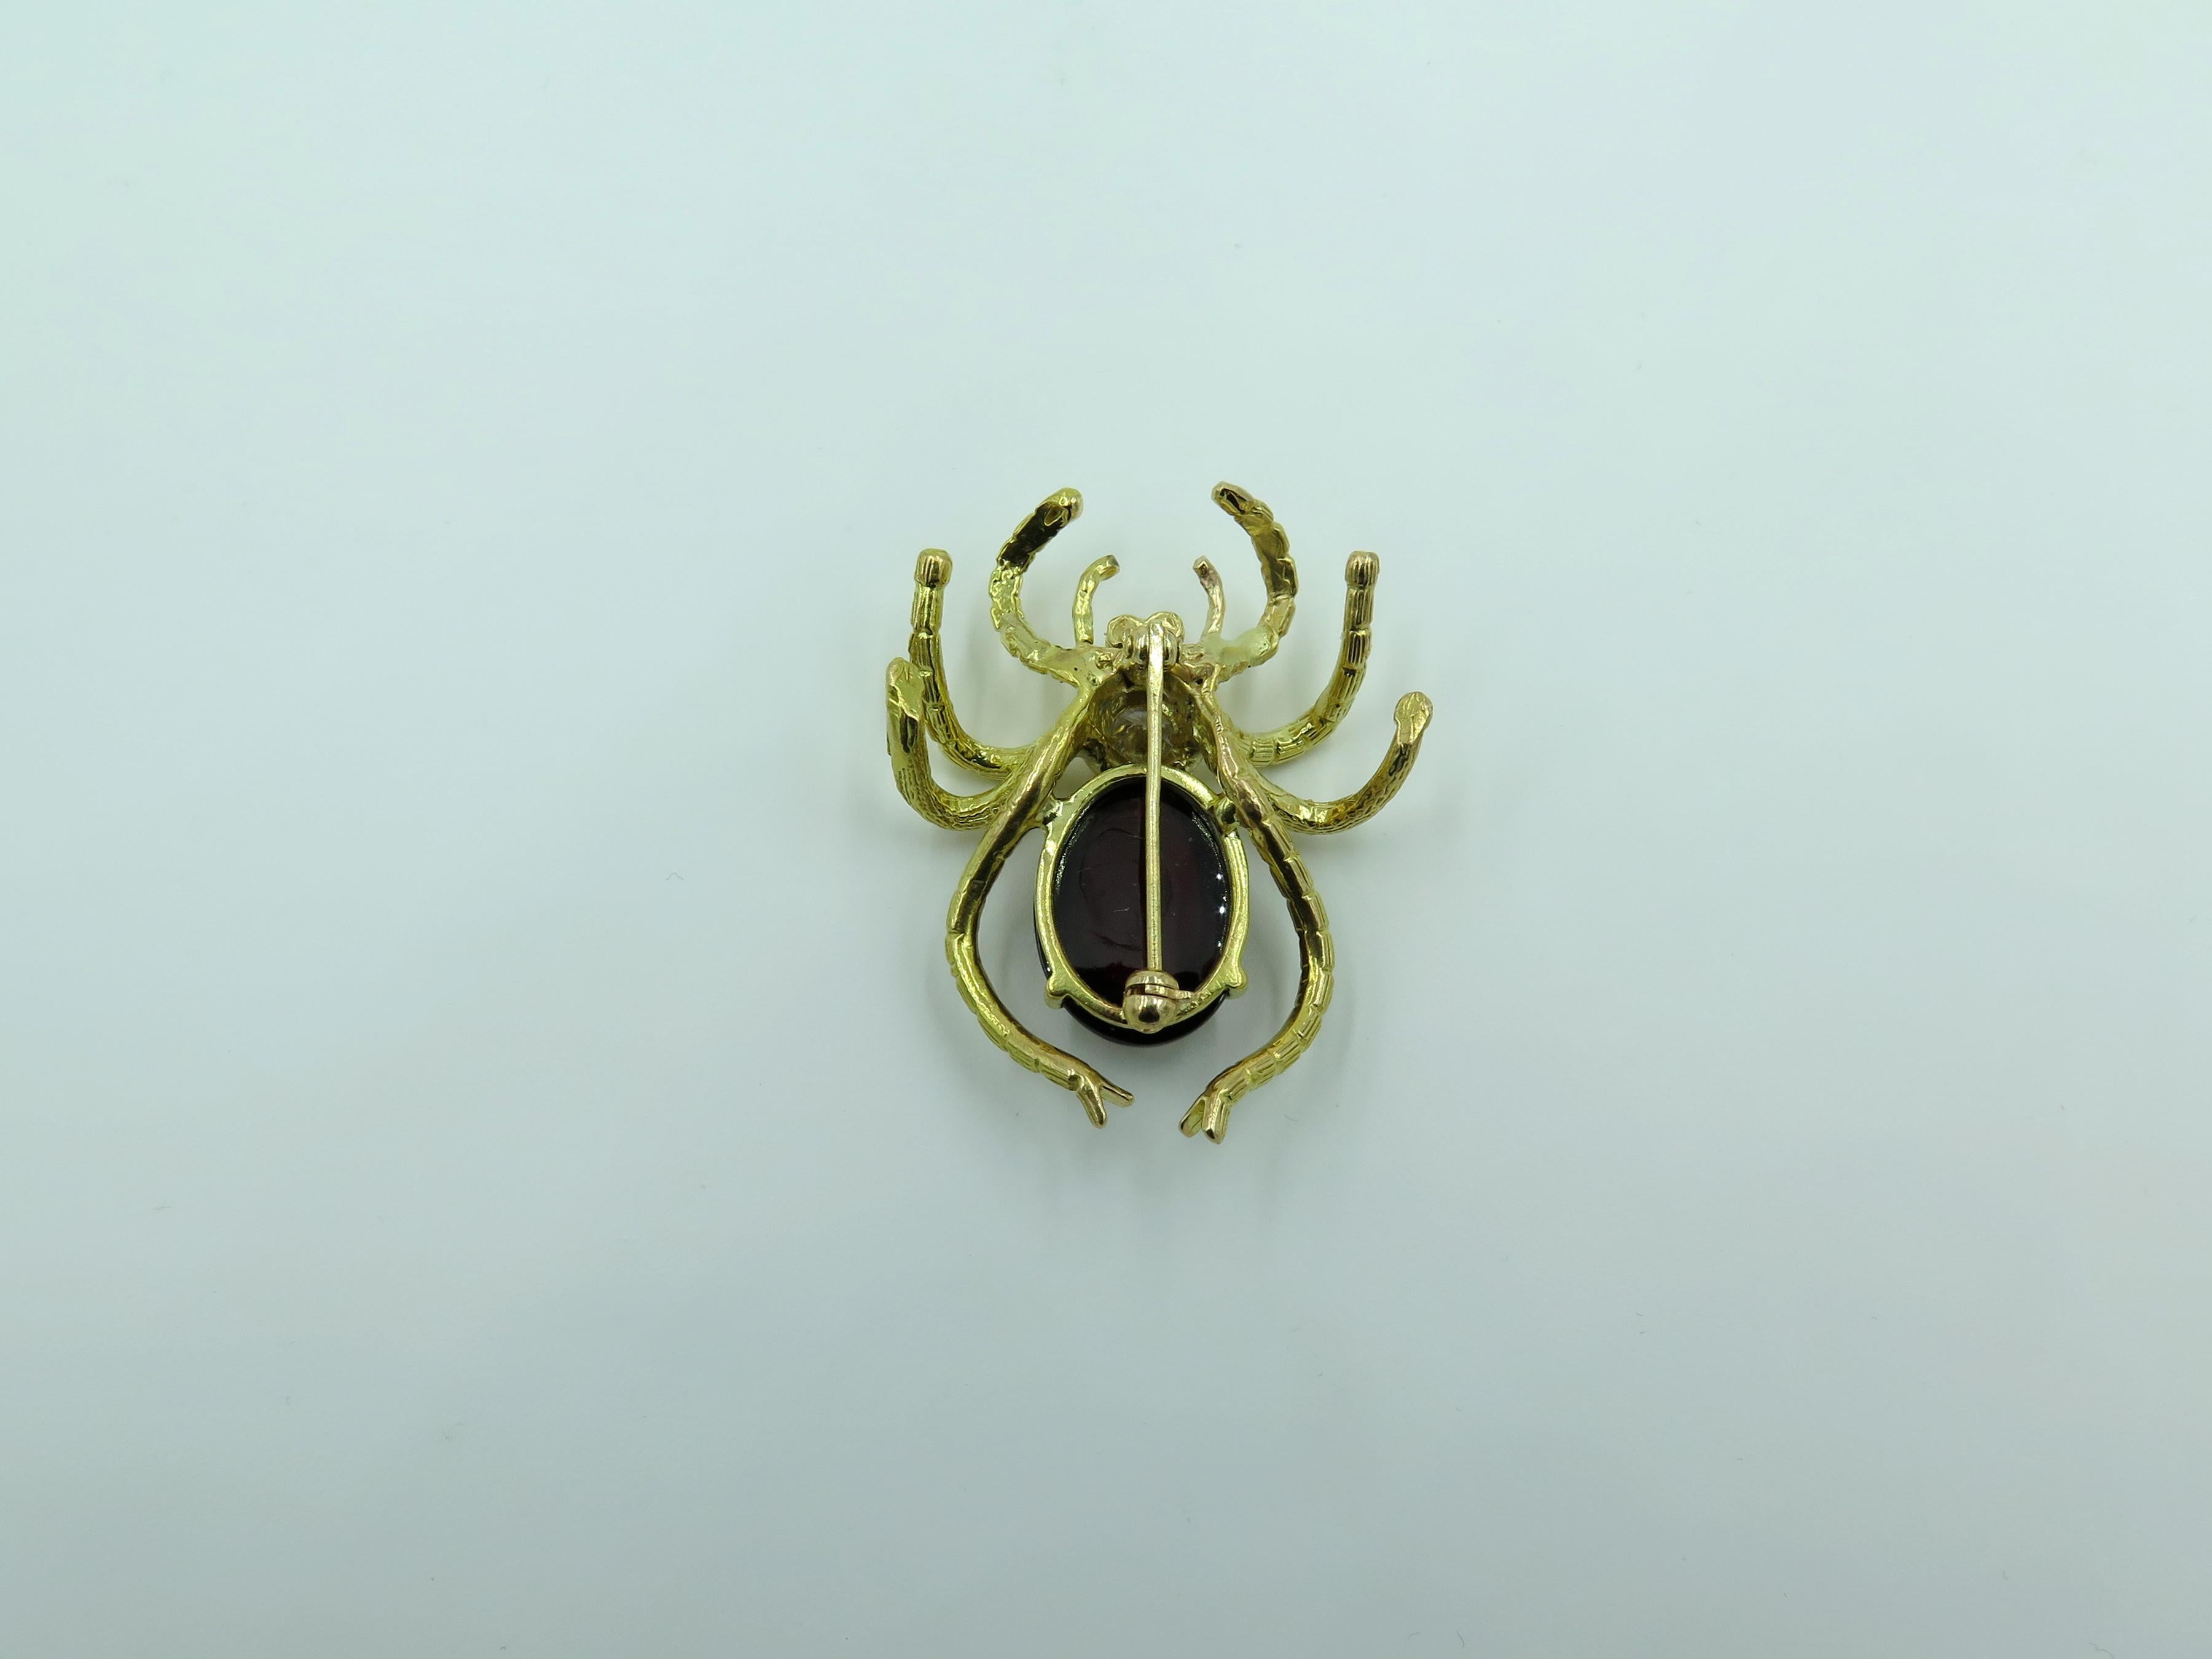 A 14 karat yellow gold, garnet and diamond spider brooch, set with an oval cabochon garnet, enhanced by a circular cut diamond, weighing approximately 0.30 carat, enhanced by small circular cut ruby eyes. Length is approximately 1 1/2 inches, gross